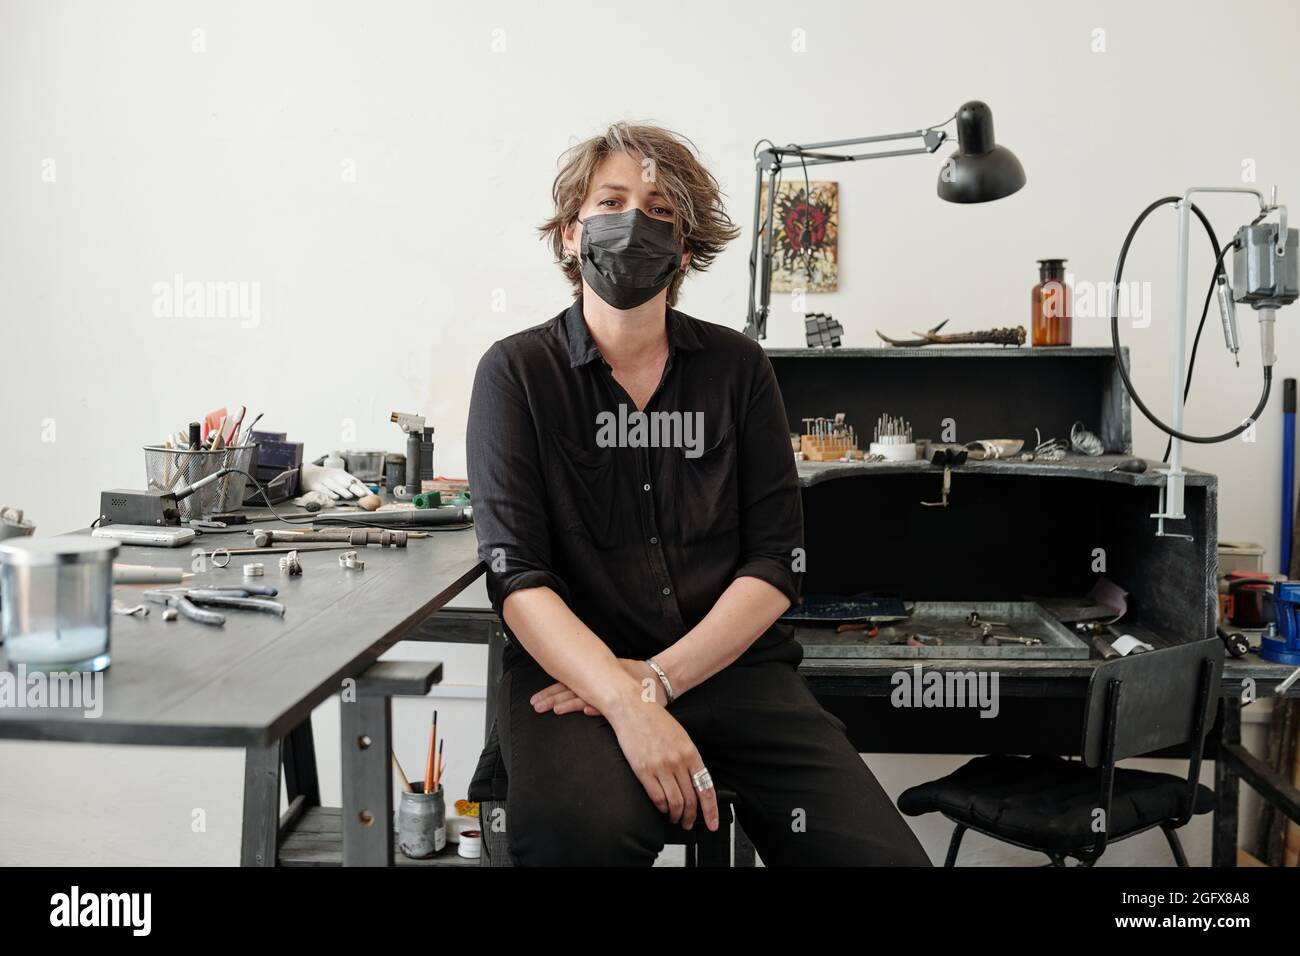 Portrait of female jeweler with short hair wearing mask sitting on stool against work bench in workshop Stock Photo